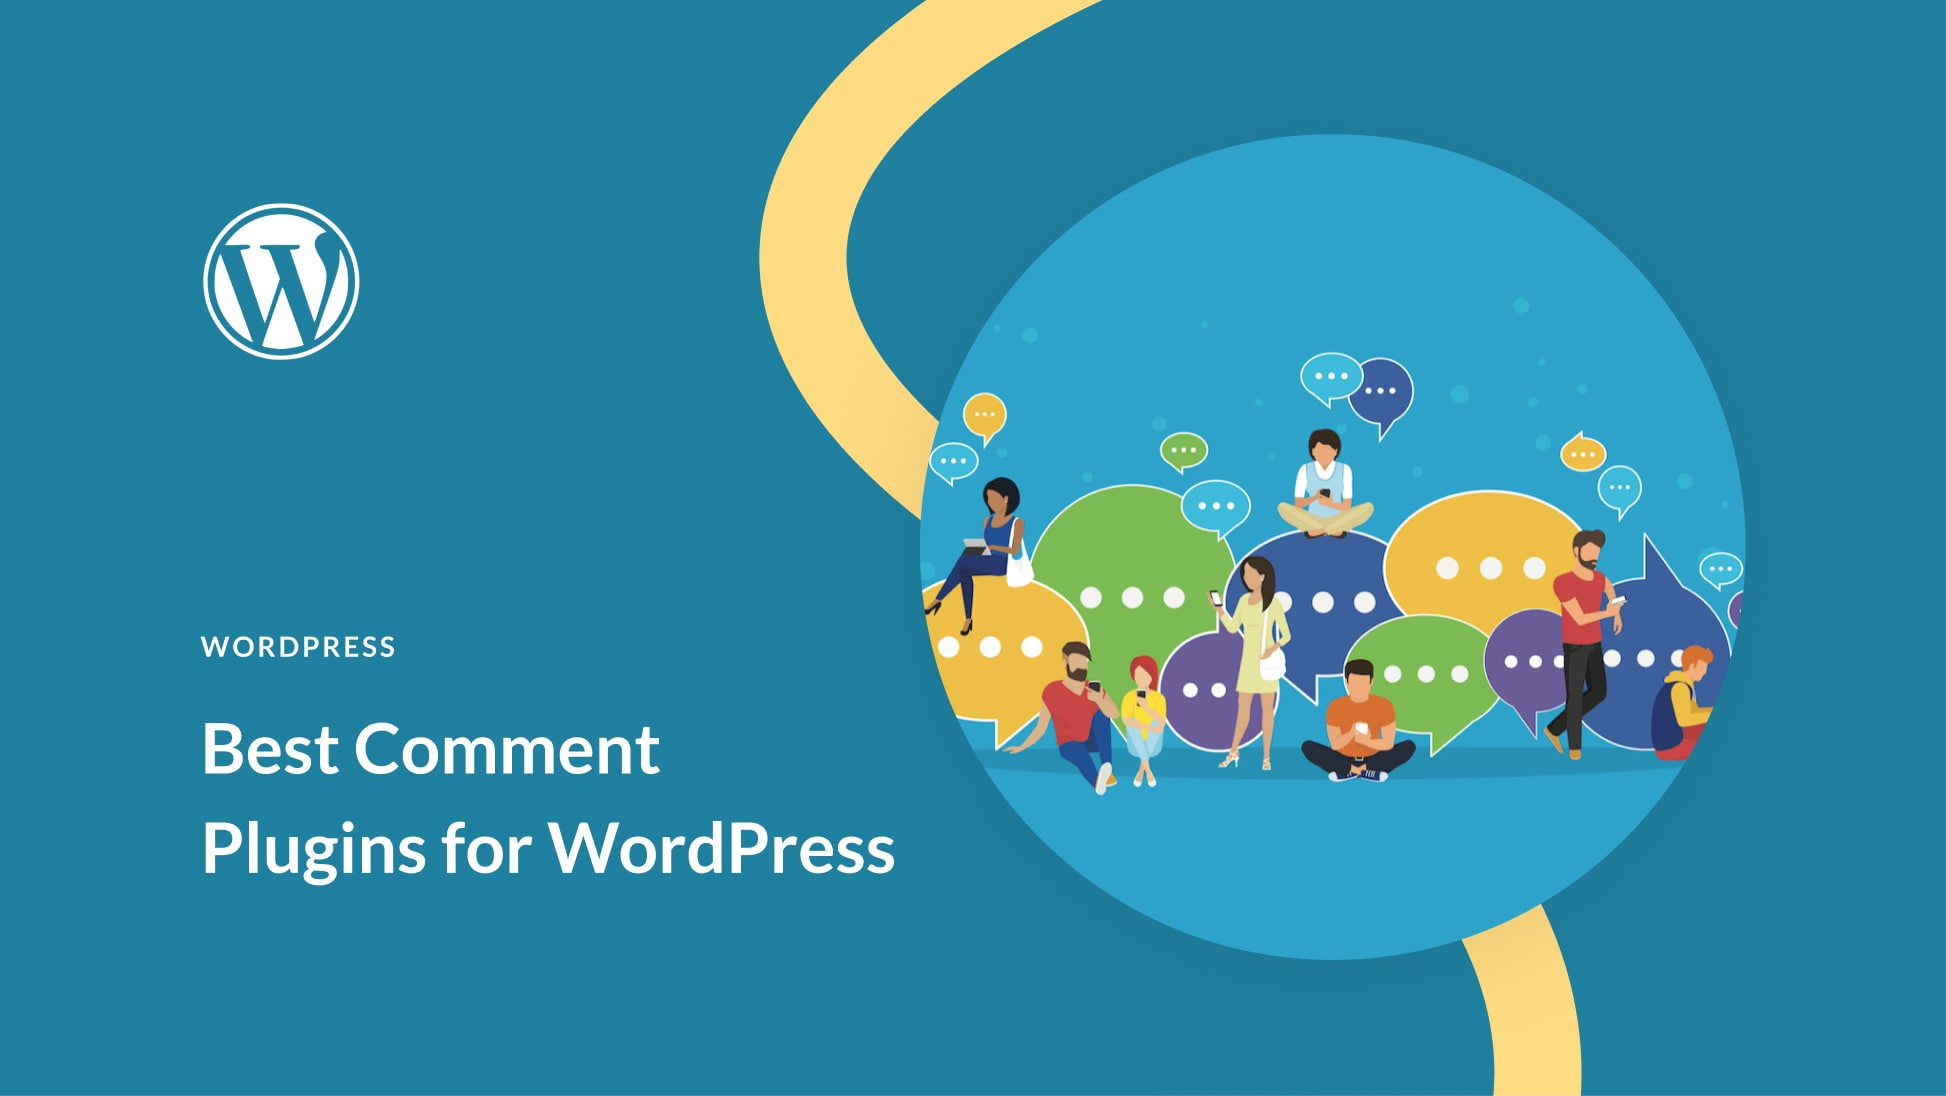 9 Best Comment Plugins for WordPress in 2023